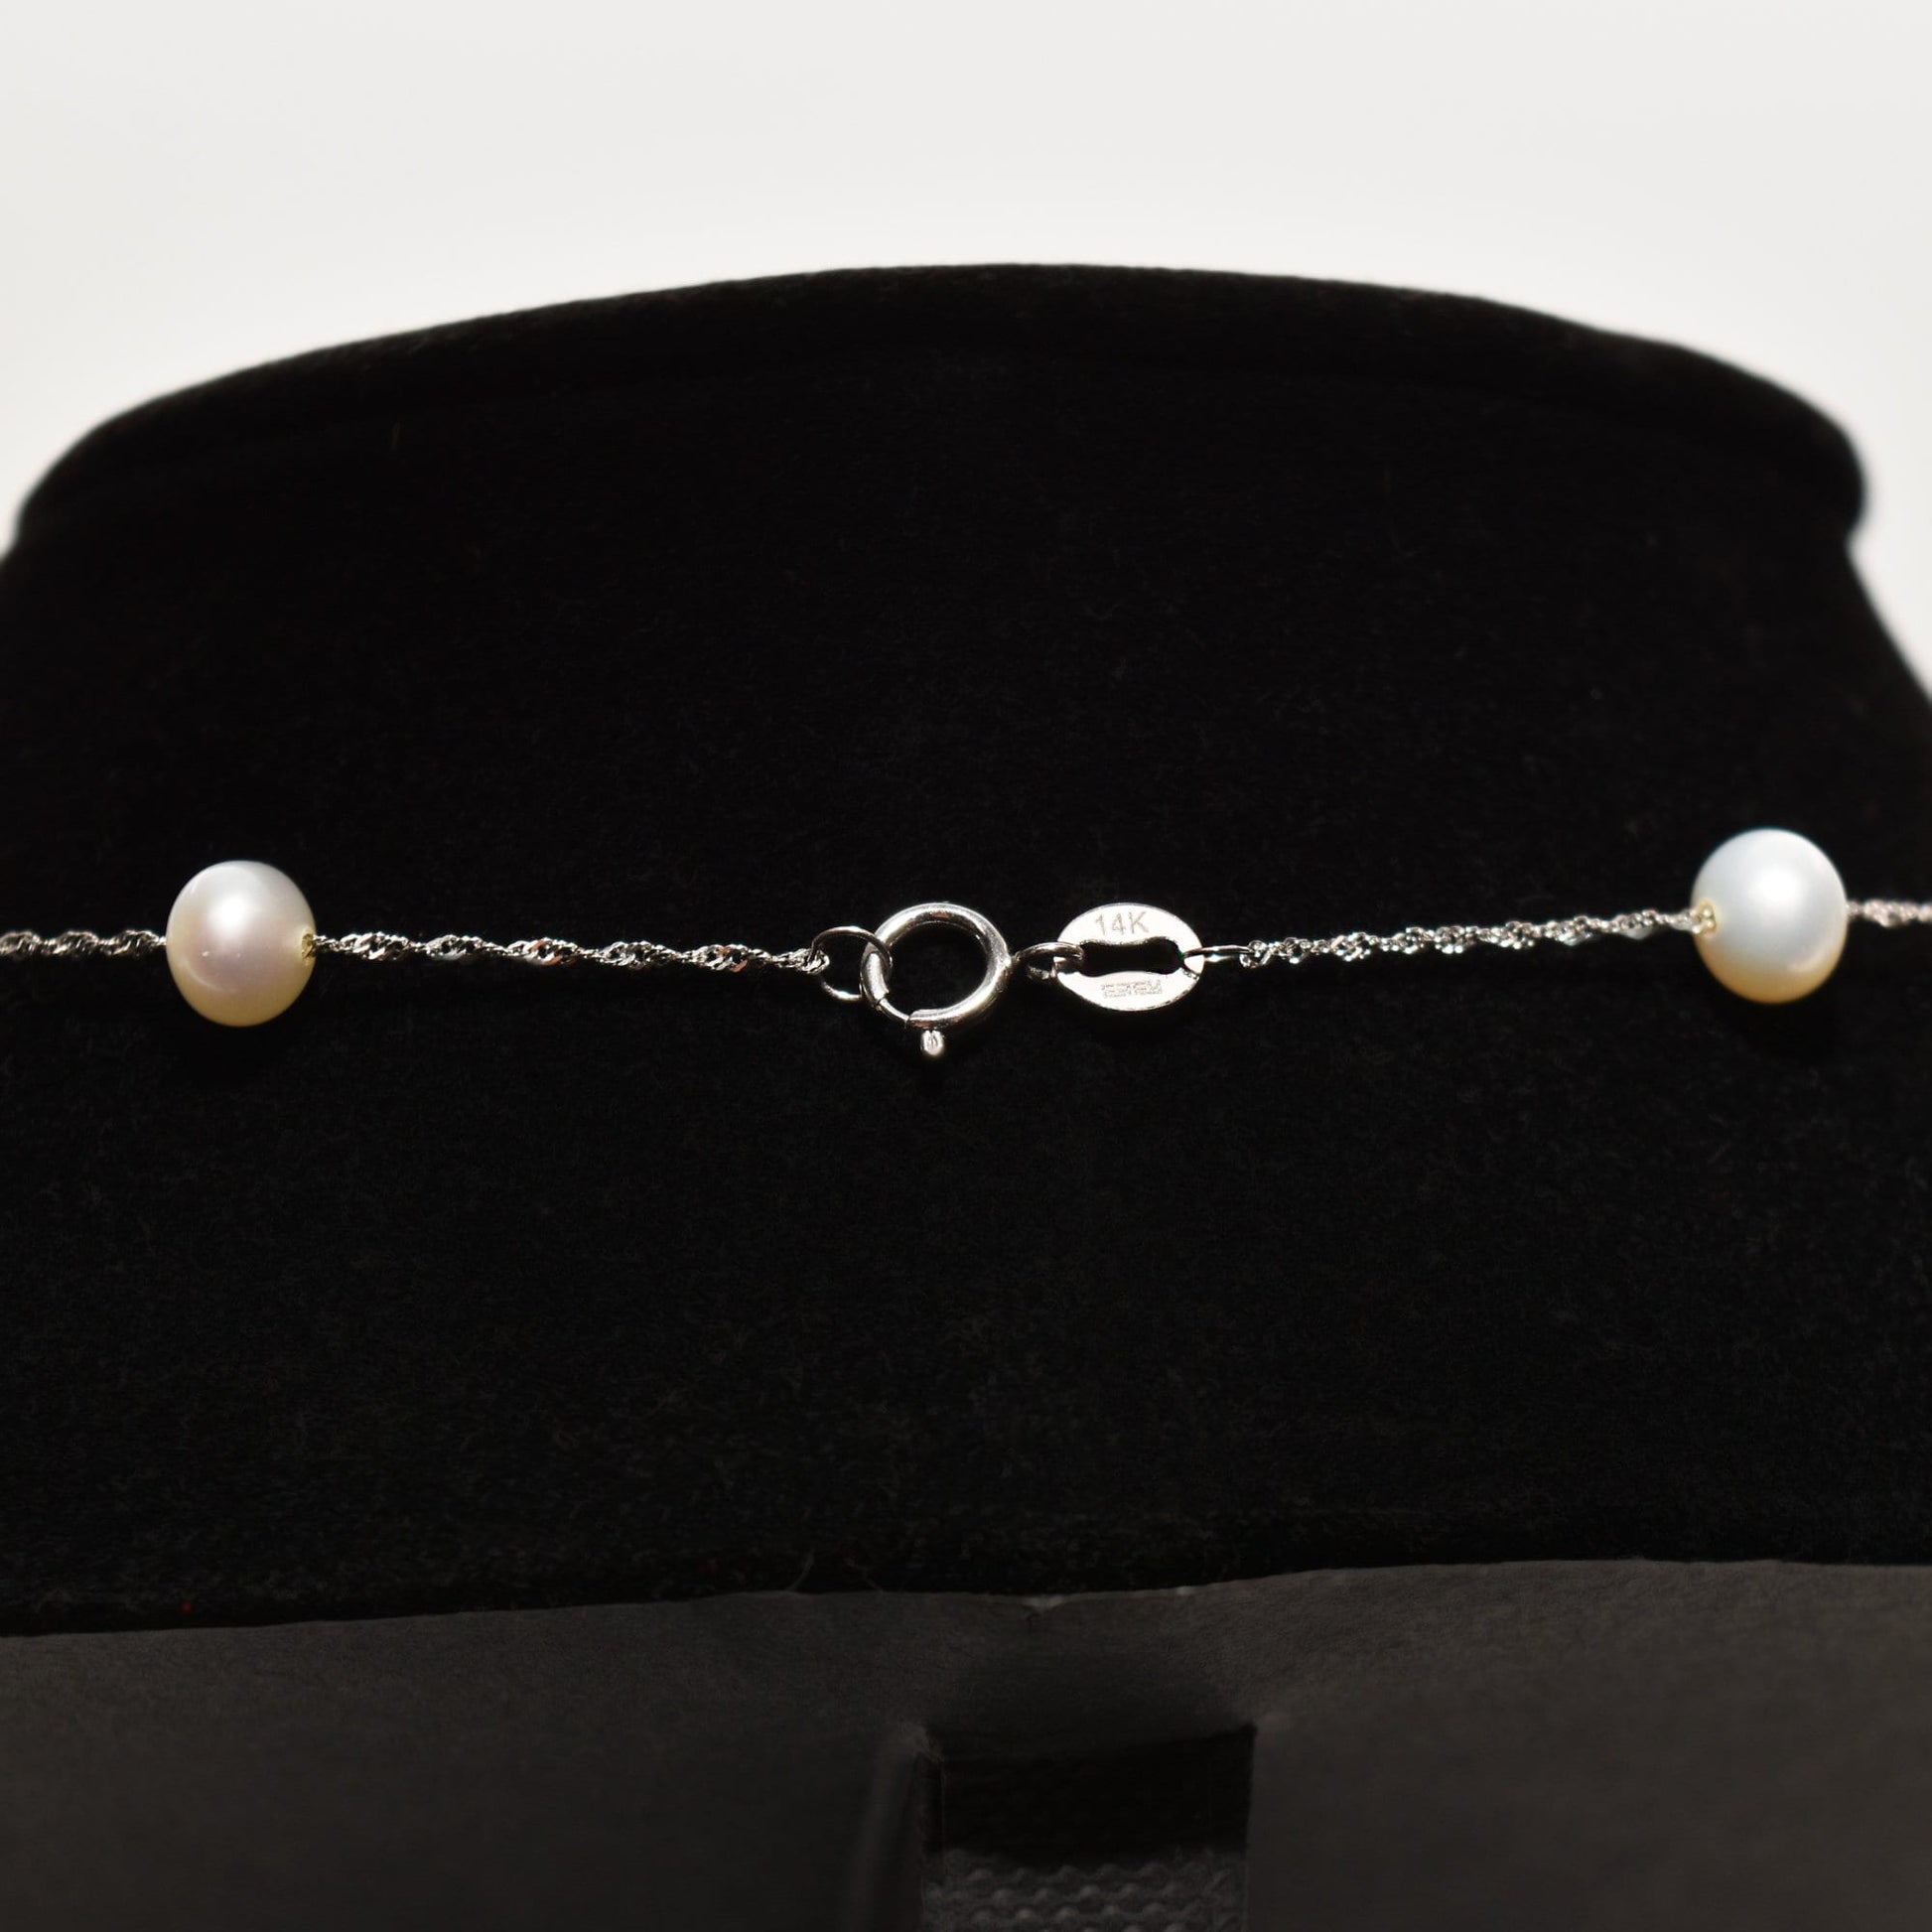 White pearl choker necklace in 14k white gold with pearl station design on black velvet display, 17.75 inches long